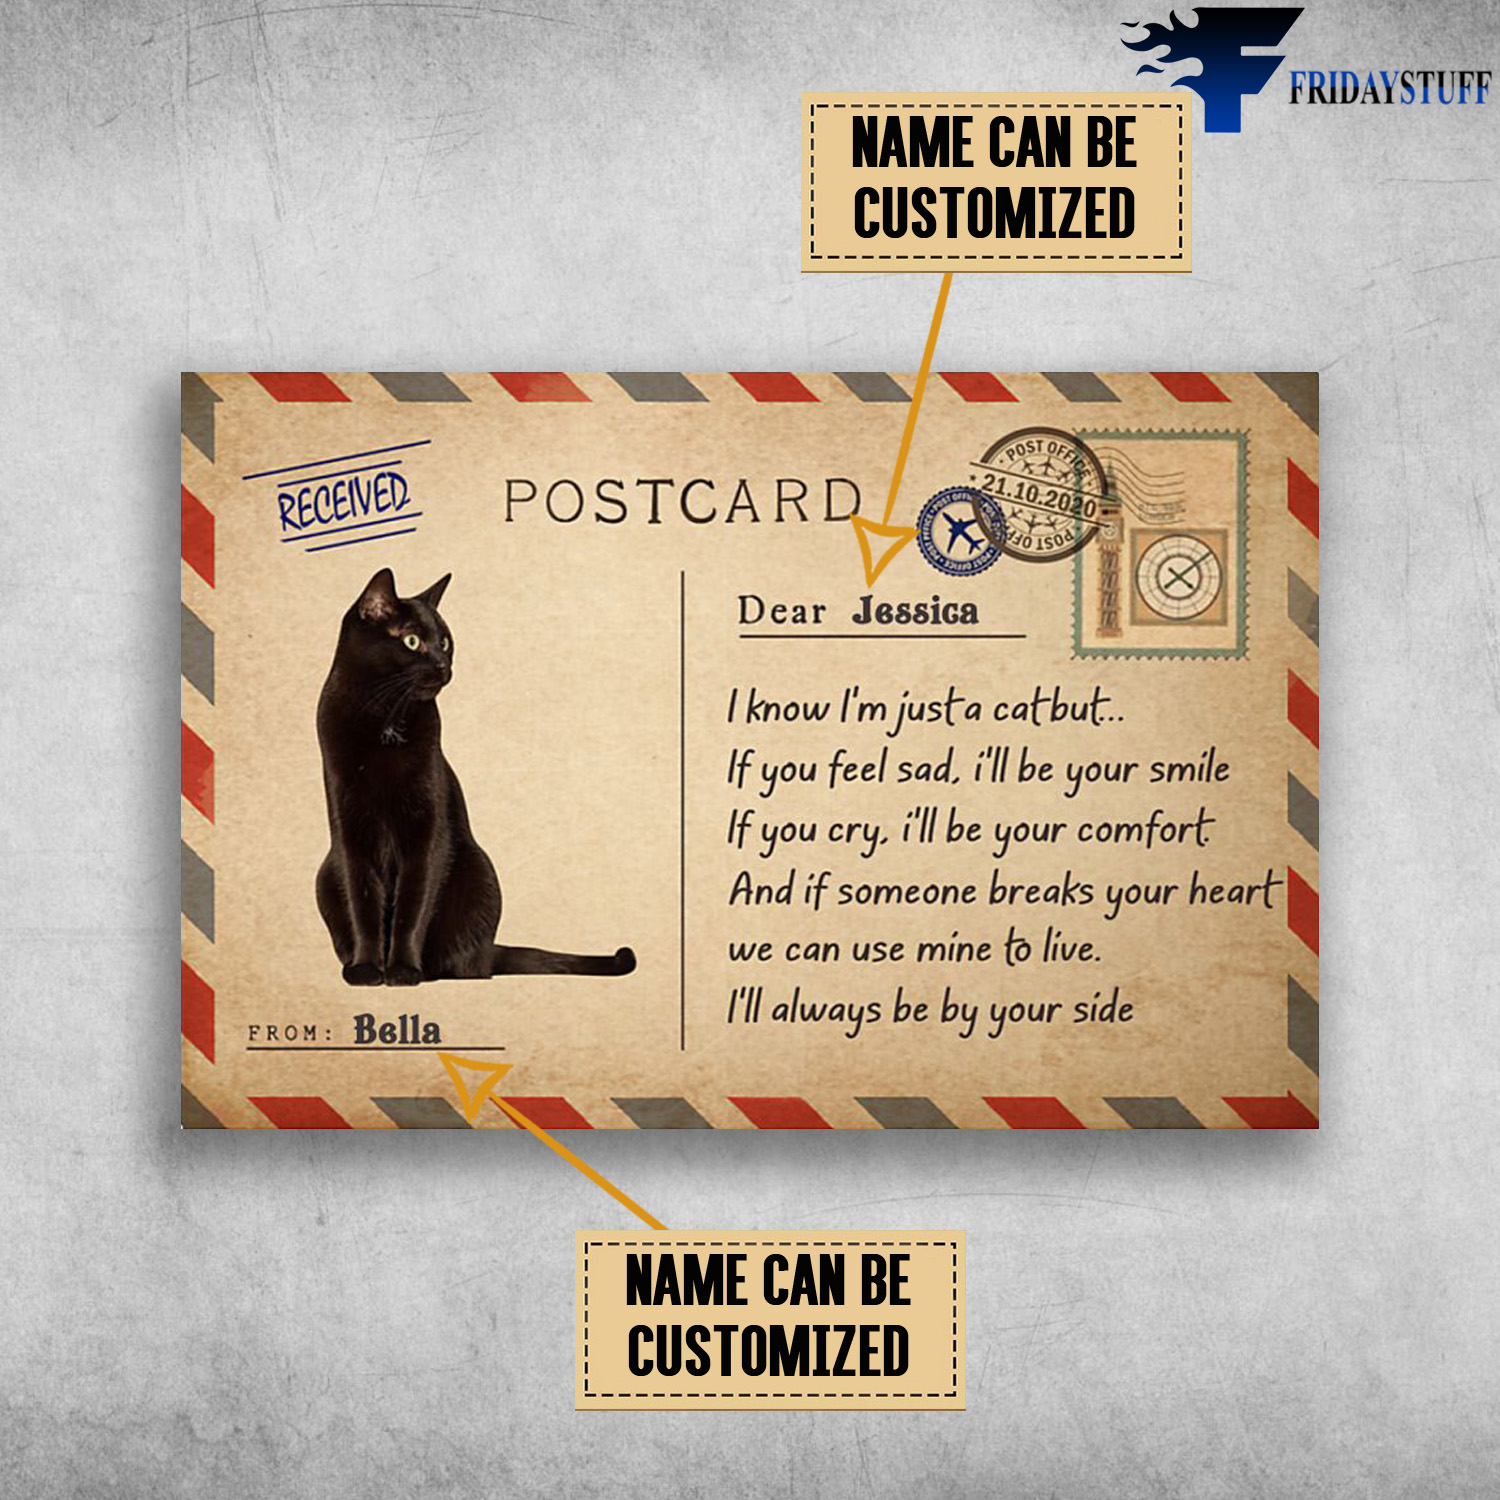 Blackcat, Received, Postcard, I Know I'm Just A Cat But, If You Feel Sad, I'll Be Your Smile, If You Cry, I'll Be Your Comfort, And If Someone Breaks Your Heart, We Can Use Mine To Live, I'll Always Be By Your Side